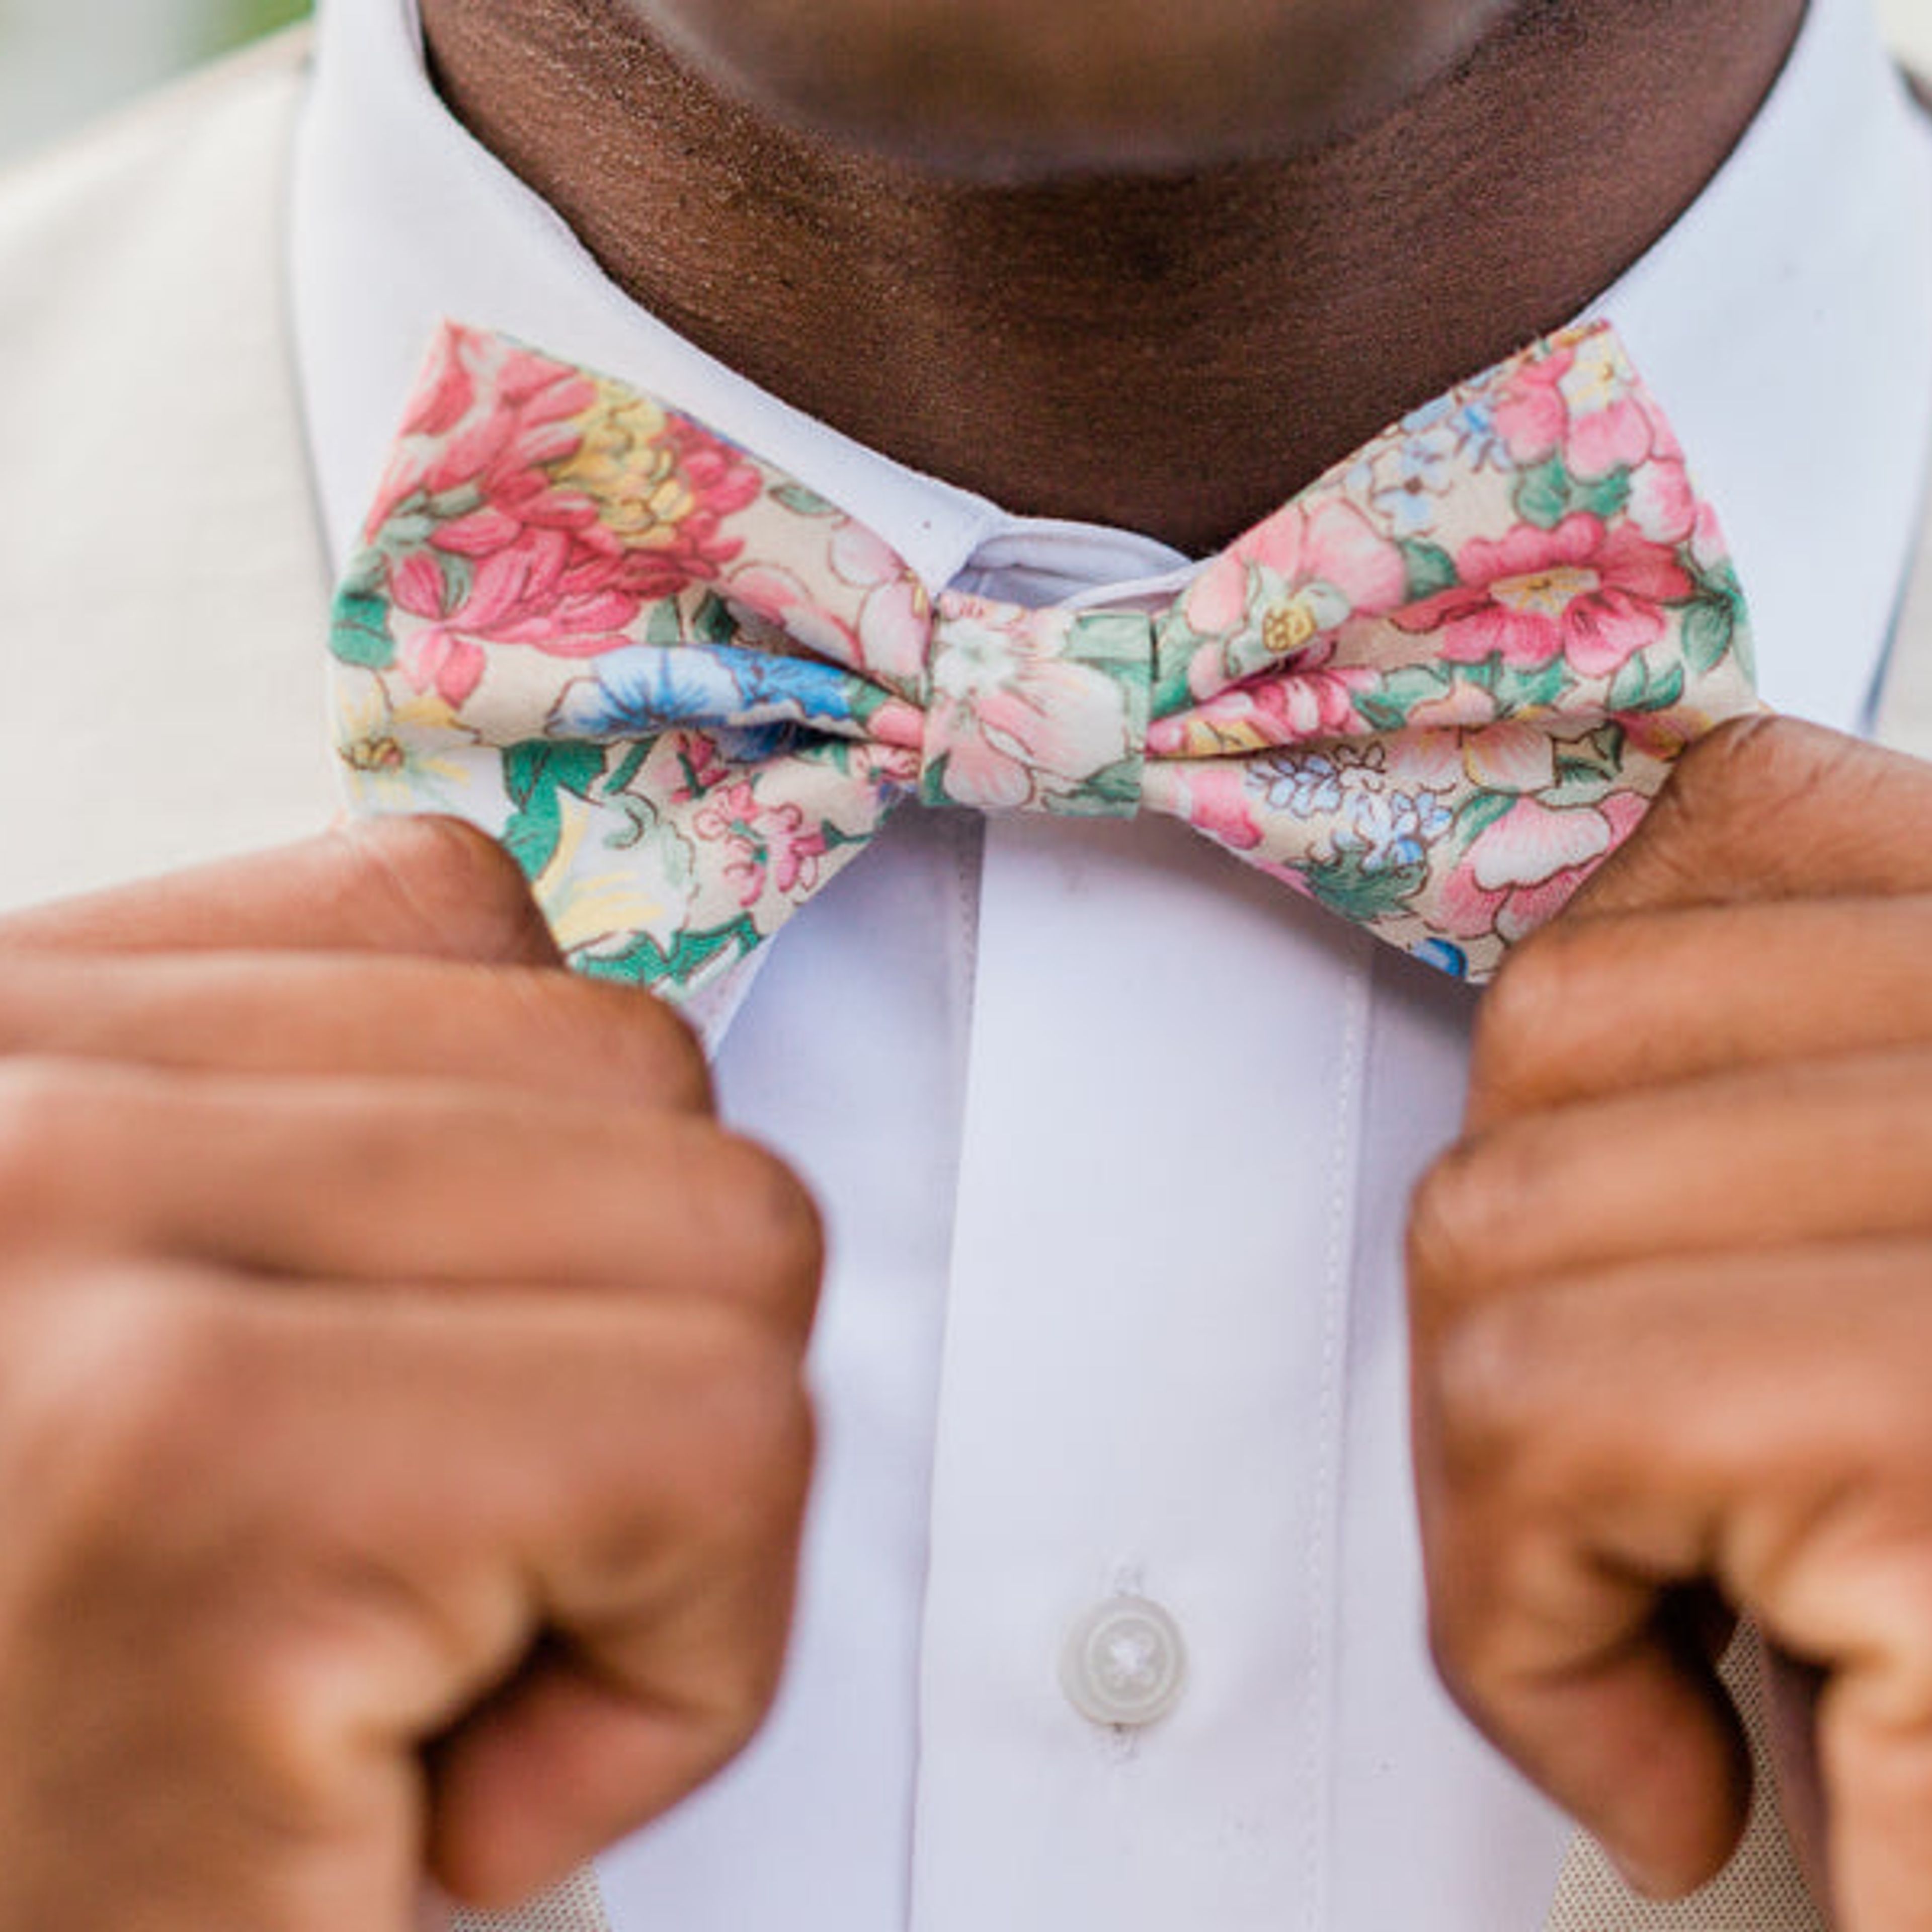 Pink, Blue, and Tan Floral Bow Tie